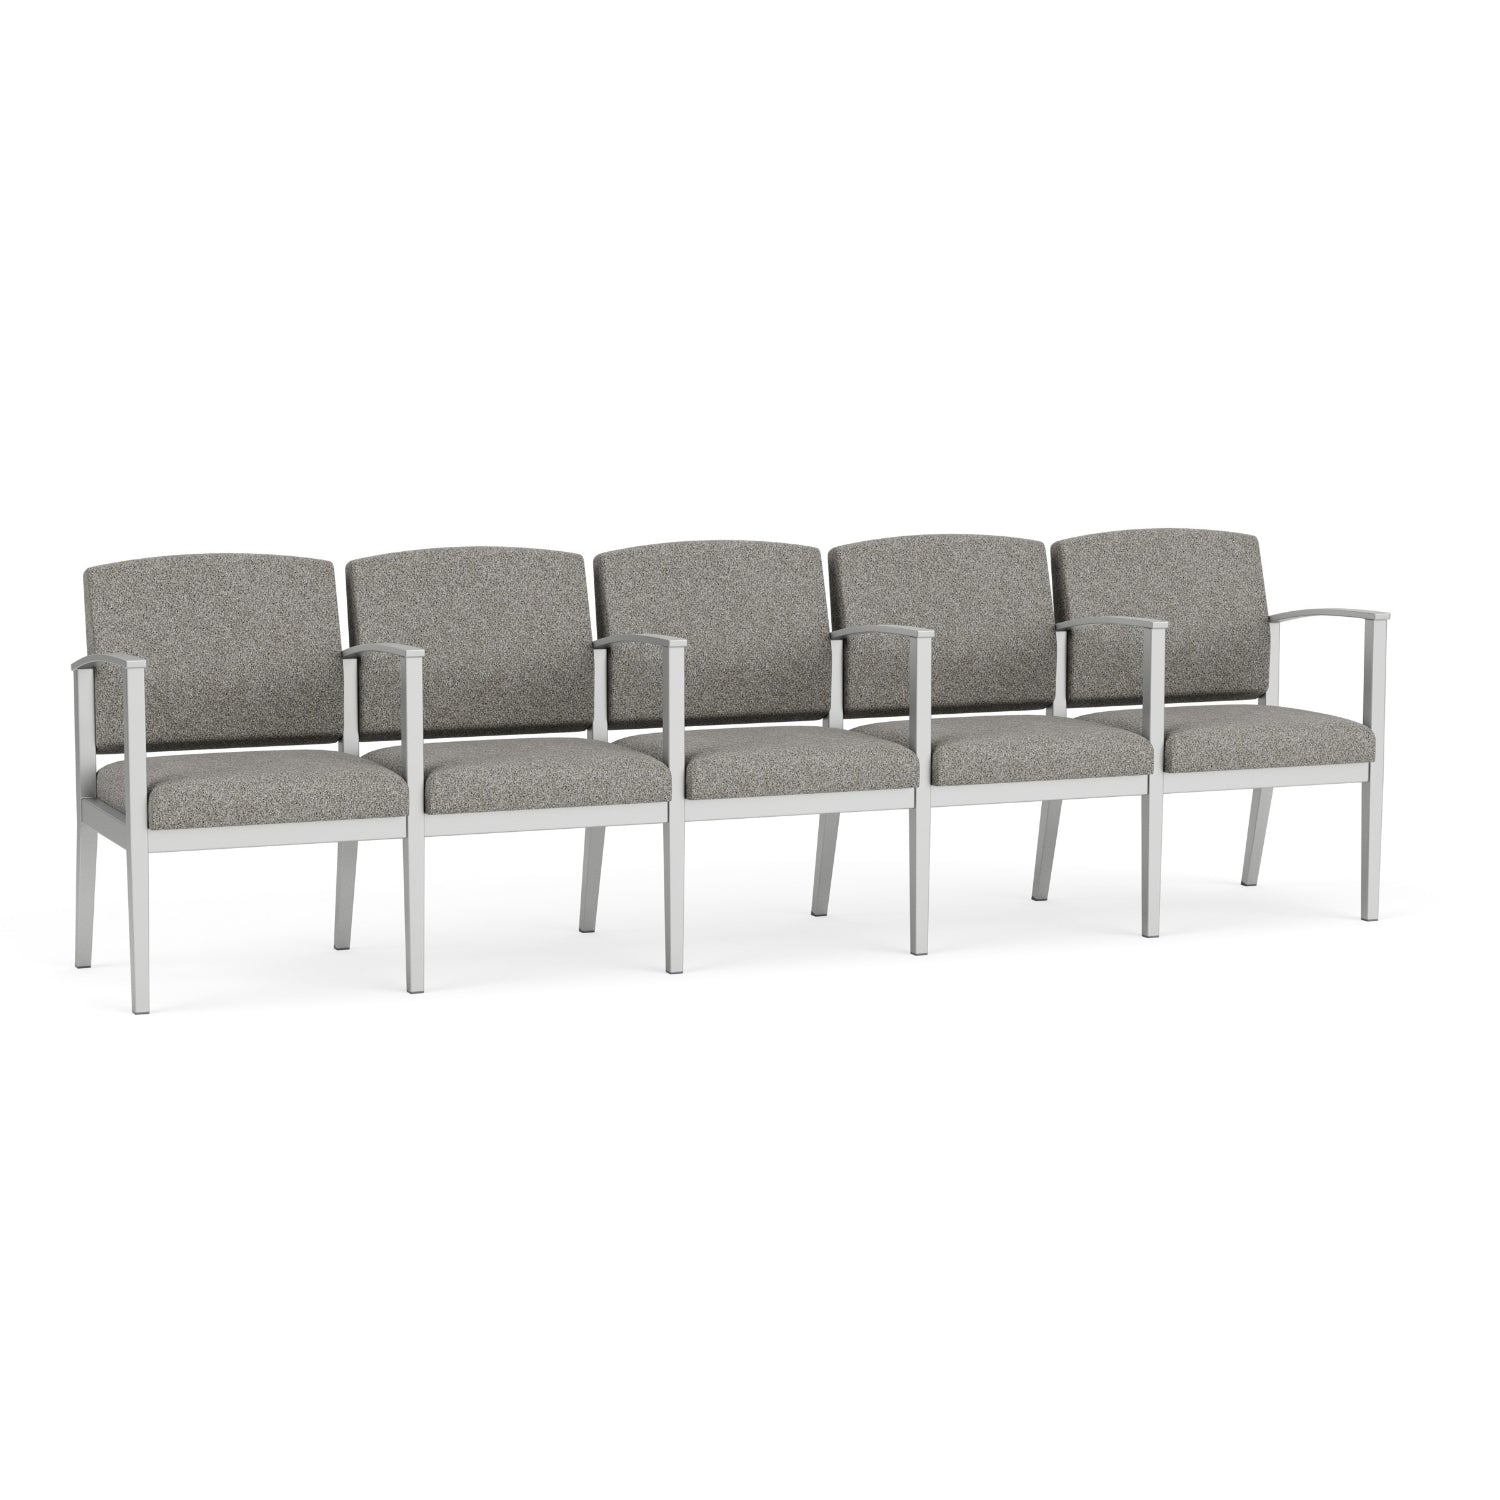 Amherst Steel Collection Reception Seating, 5 Seats with Center Arms, Standard Fabric Upholstery, FREE SHIPPING